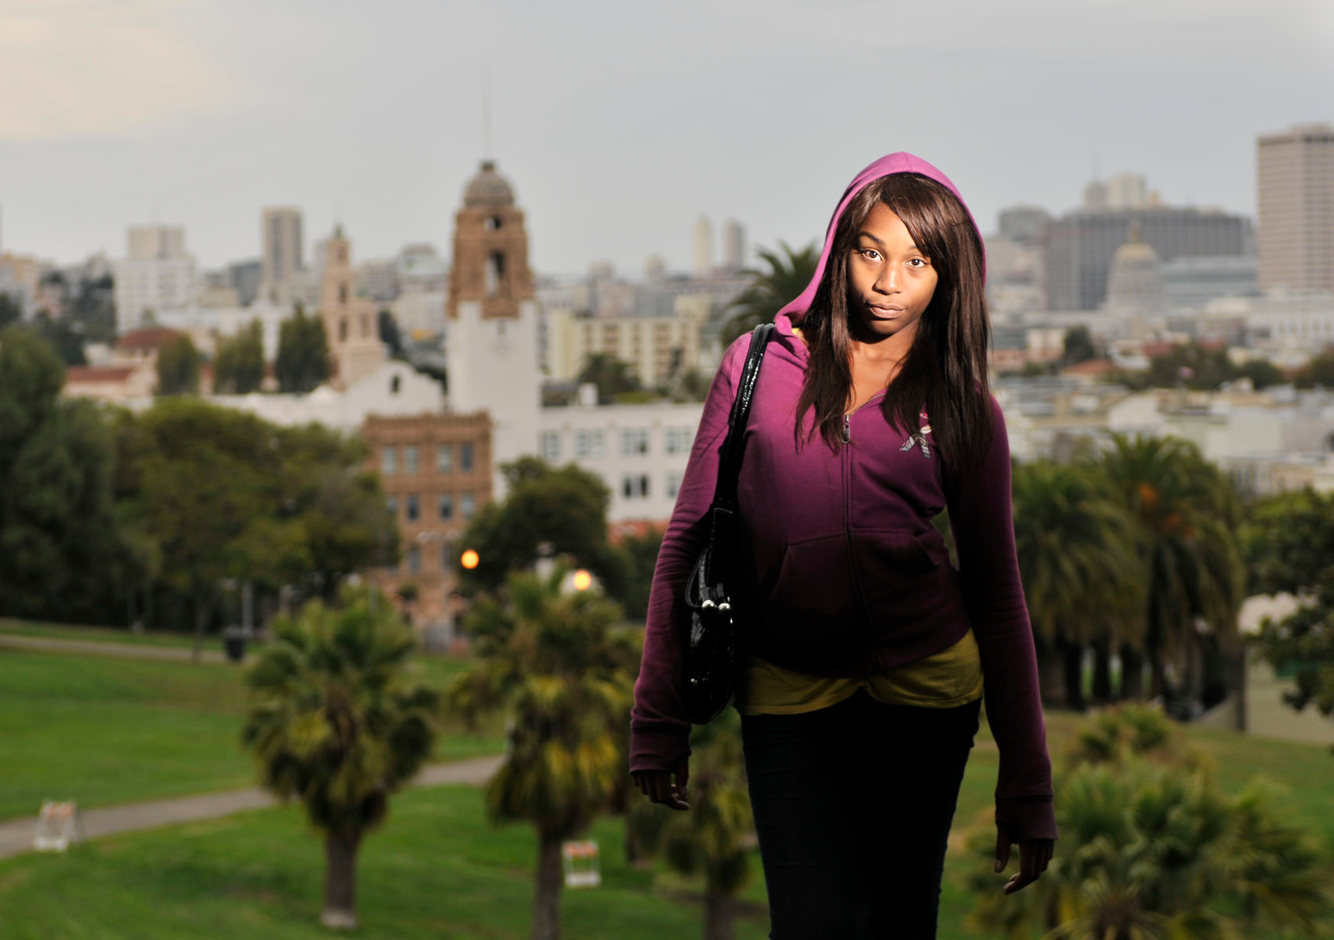 A transgender student victimized by bullying poses for a portrait near her San Francisco school.